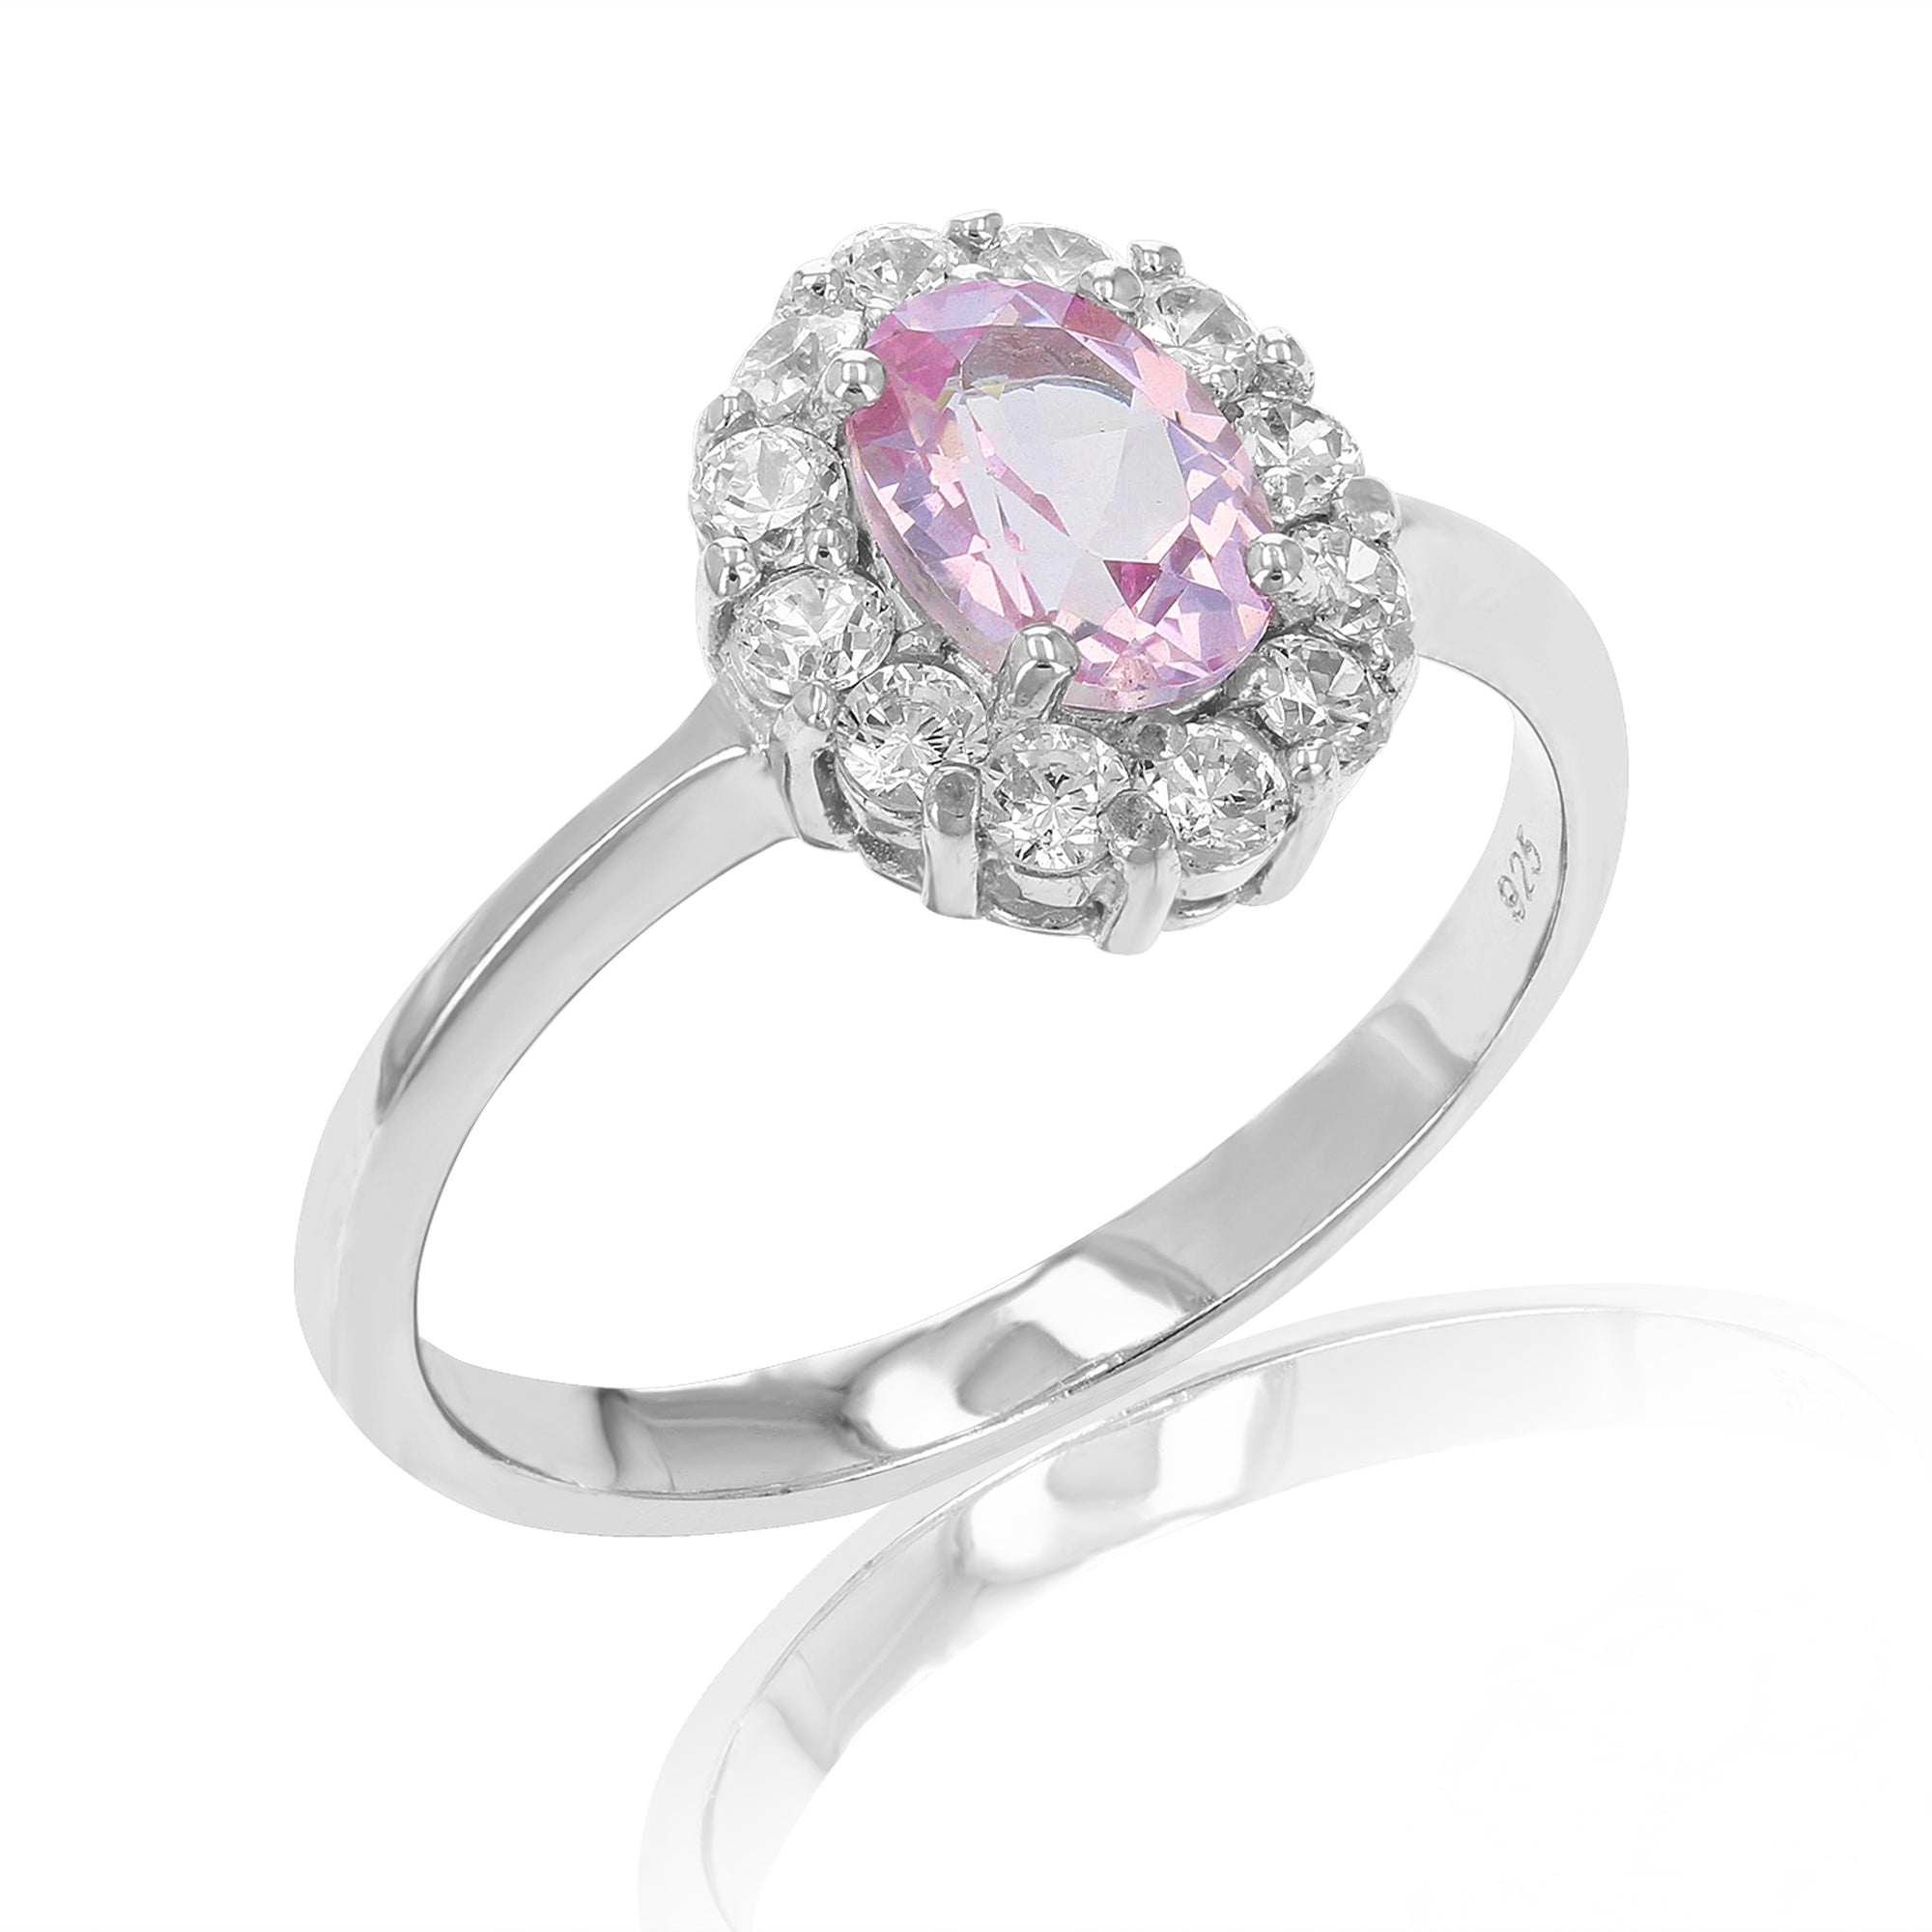 0.70 cttw Pink Topaz Ring .925 Sterling Silver with Rhodium Plating Oval Shape